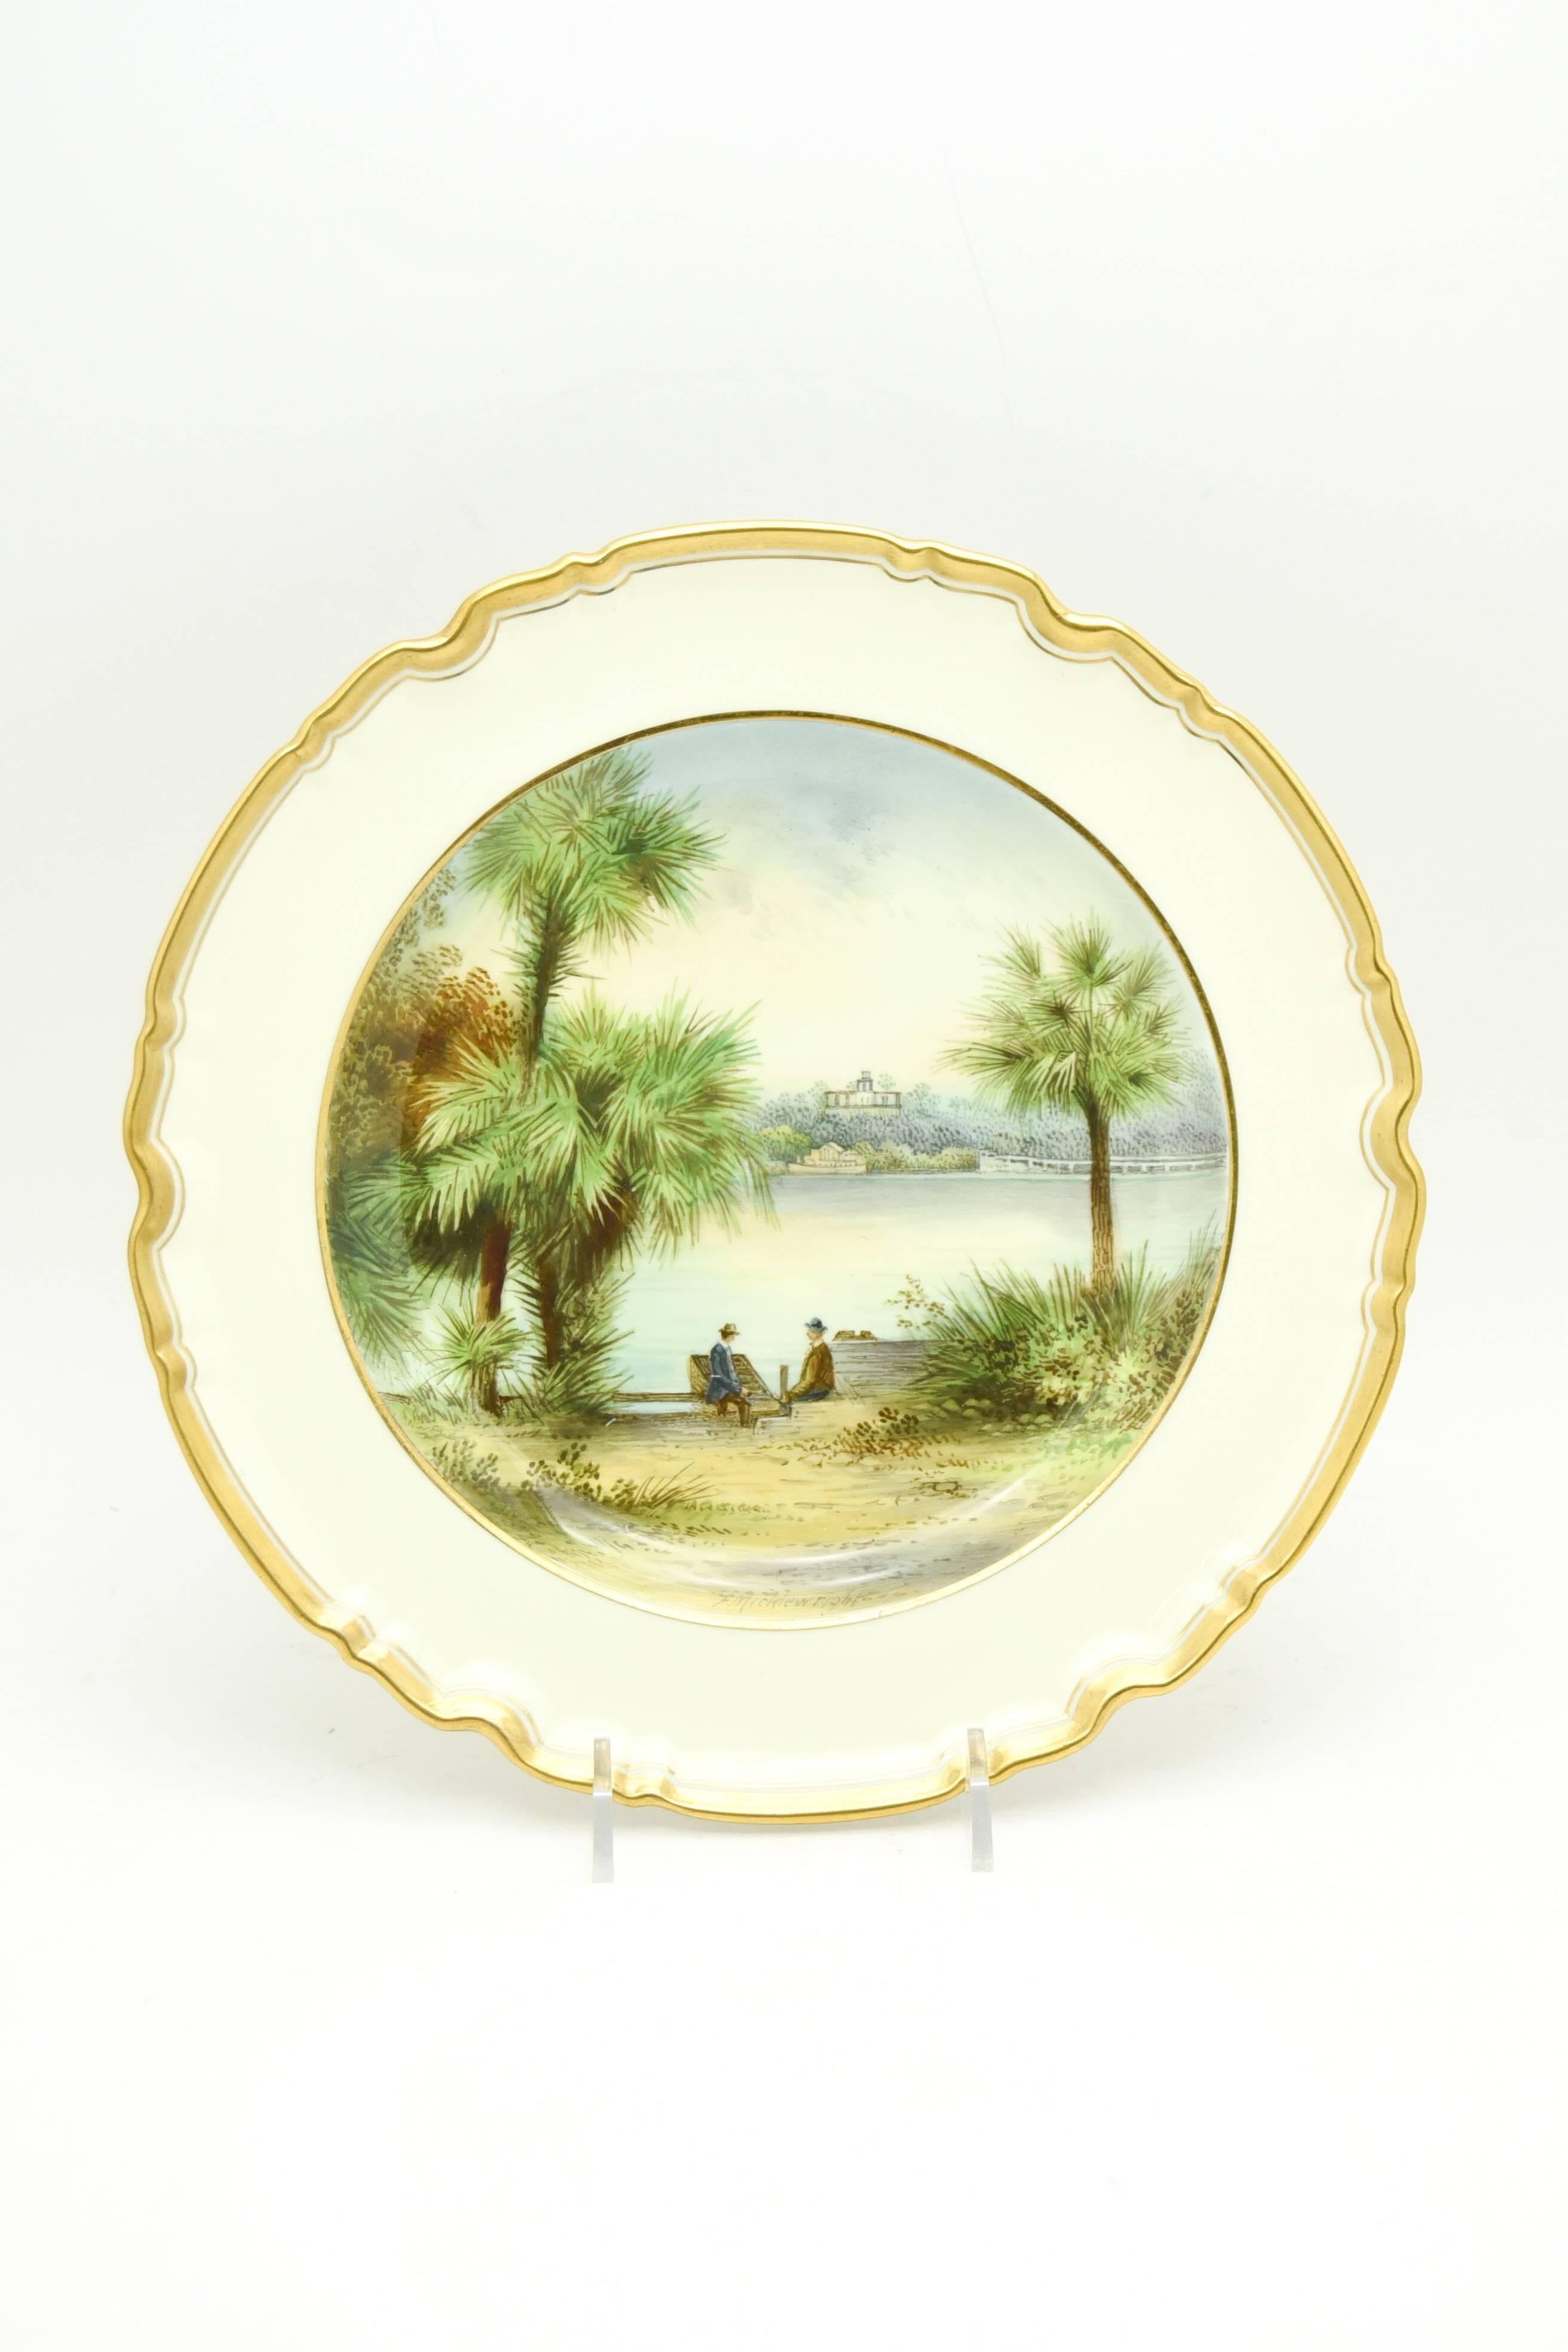 English 12 Copeland Spode Hand Painted Historic Fresh Water Cabinet/Dessert Plates For Sale